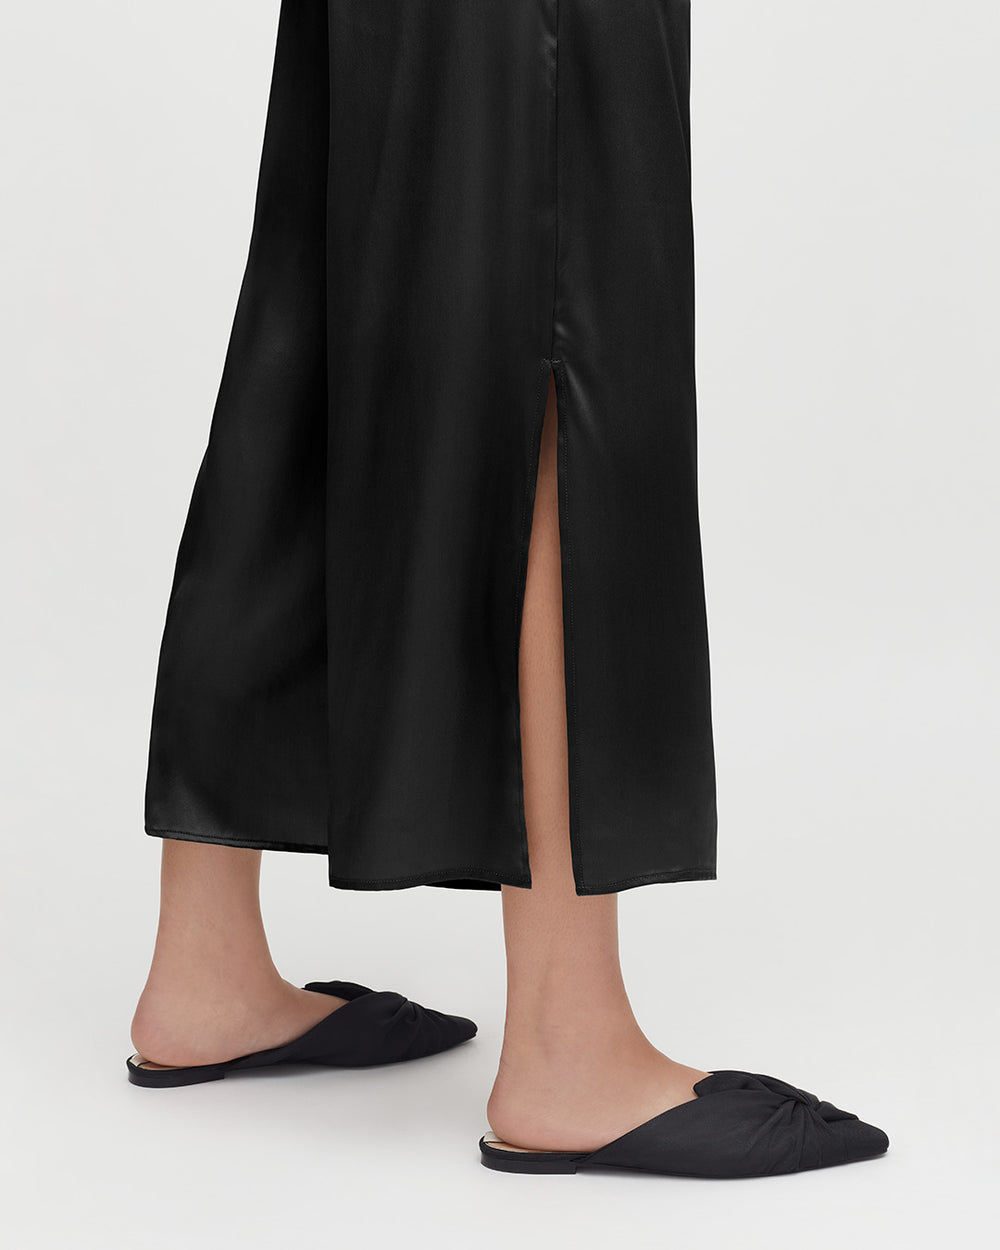 Person wearing long skirt and flat shoes, standing with a visible leg through a skirt slit.